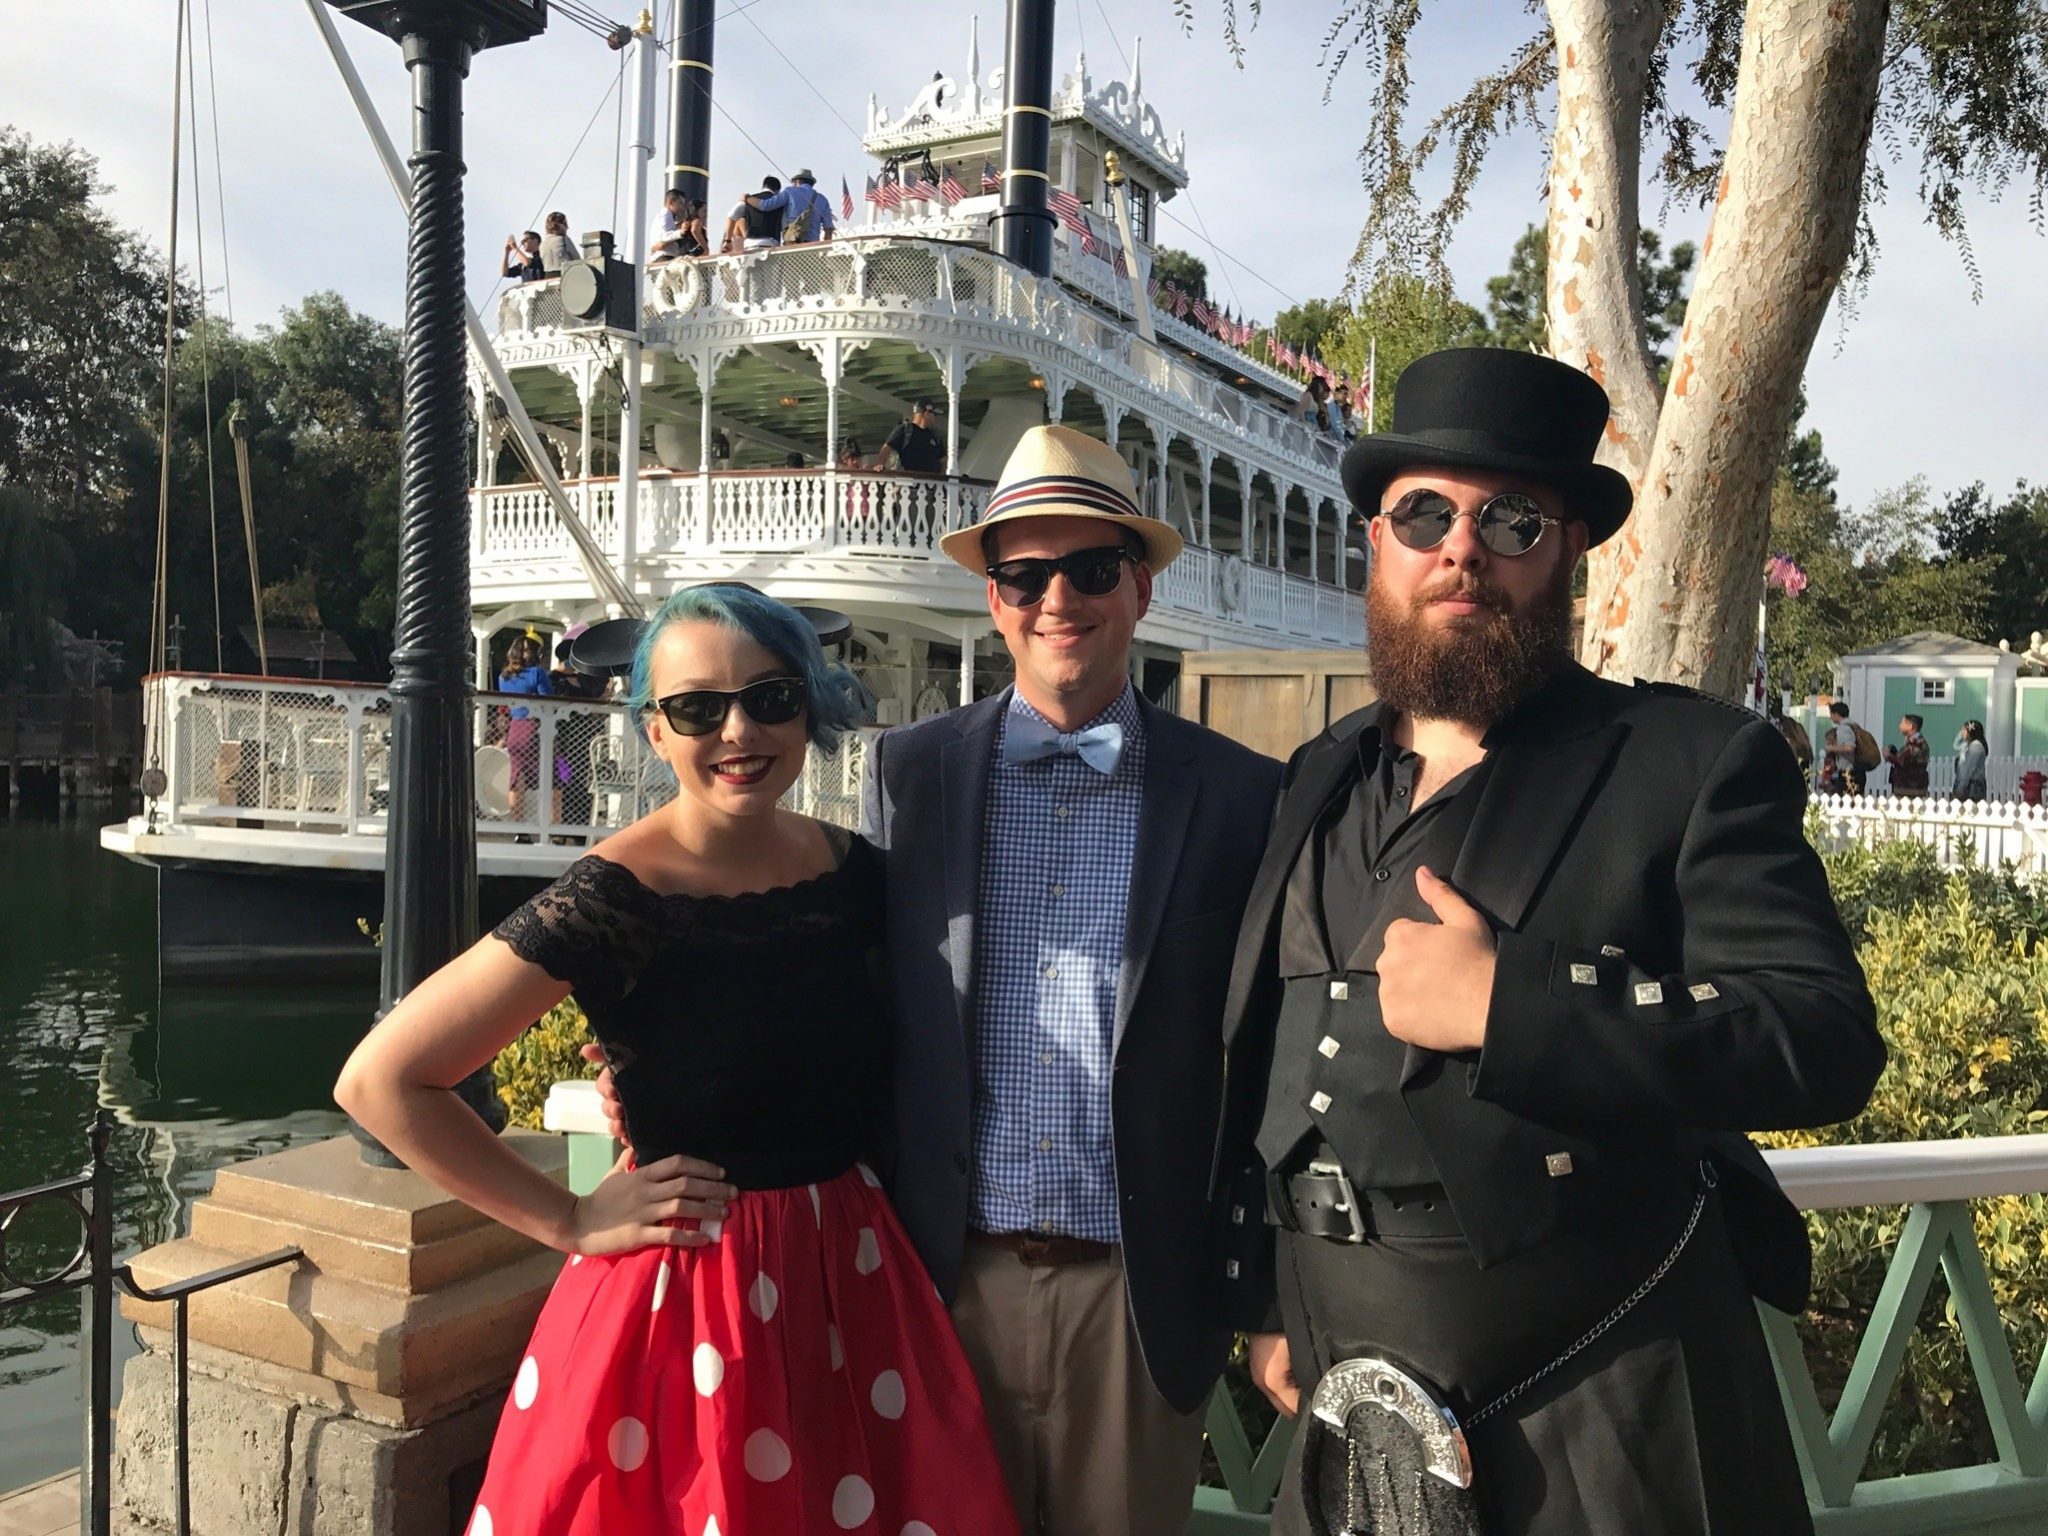 Caitie’s Five Tips to Successfully Preparing for Dapper Day